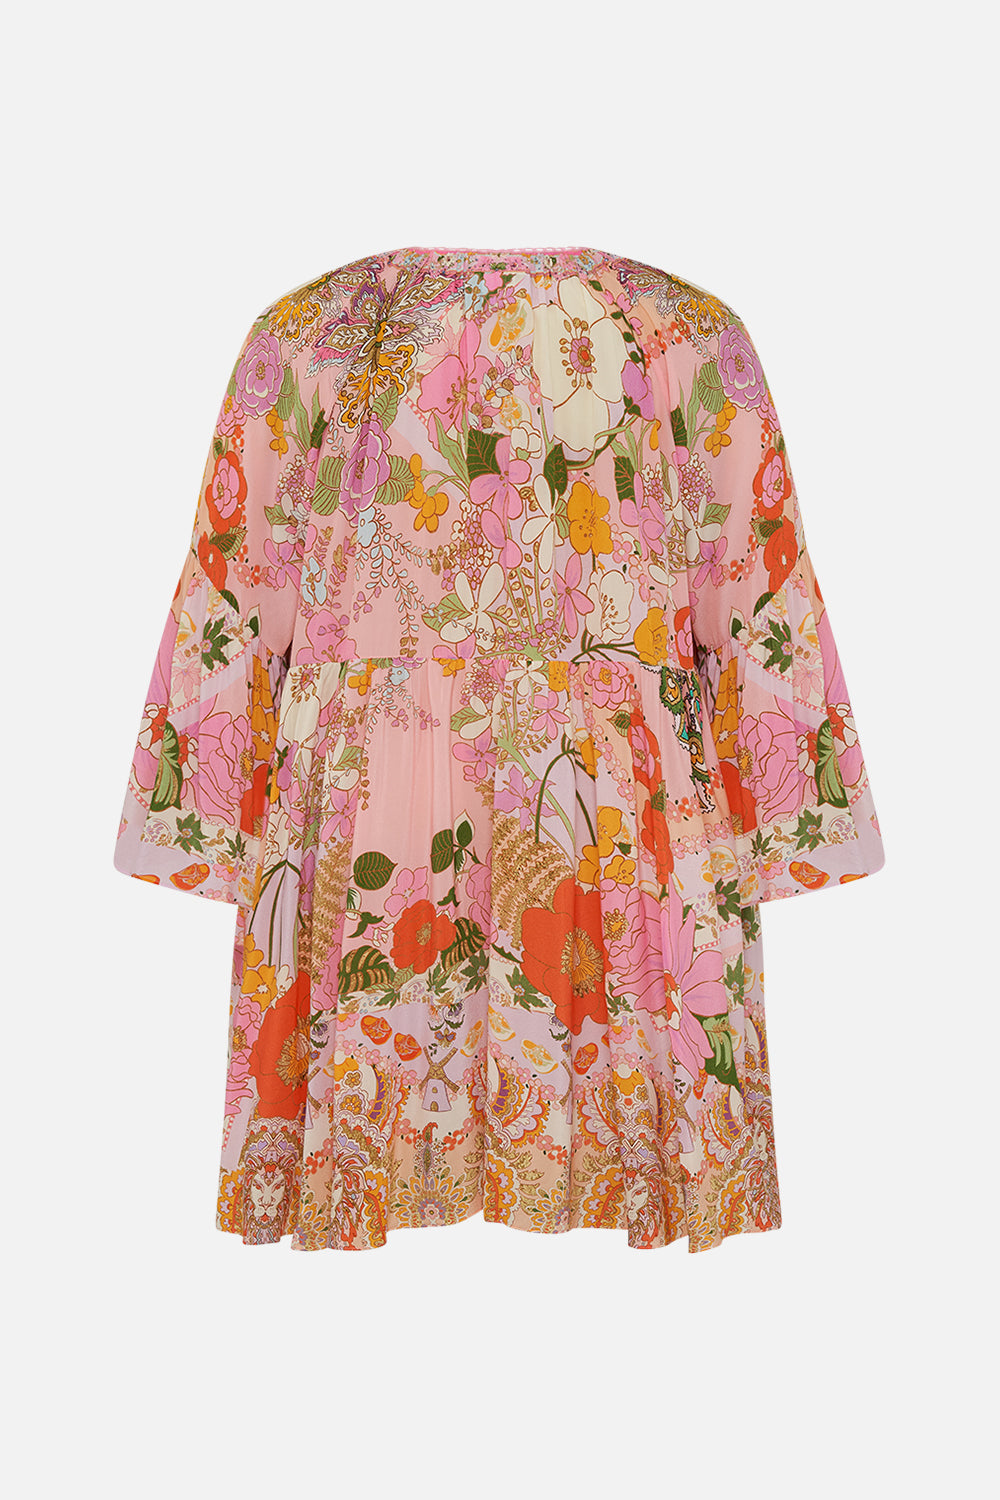 CAMILLA floral a line dress in Clever Clogs print